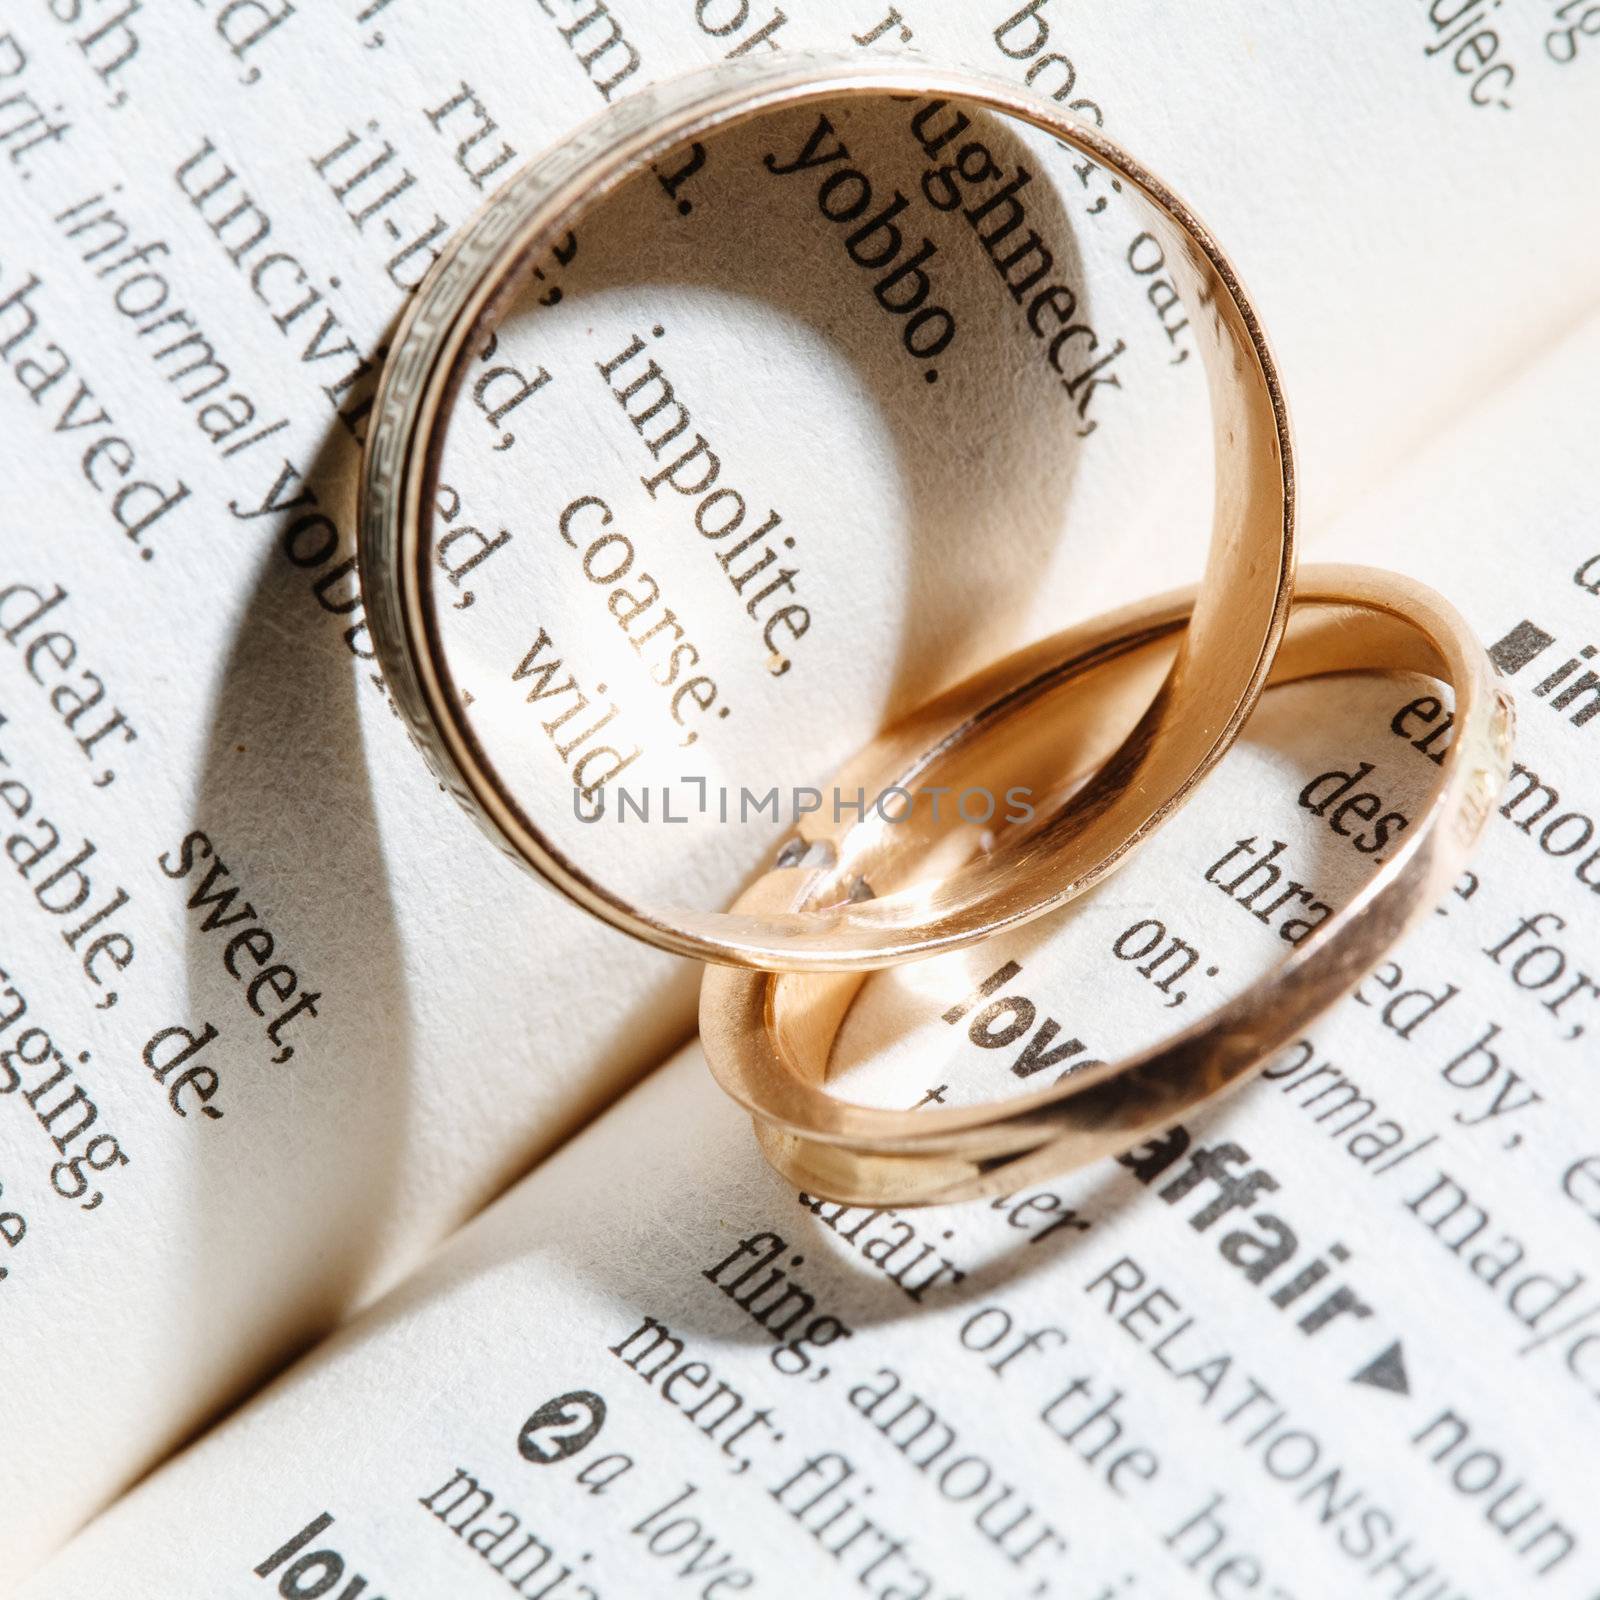 An image of two wedding rings on a background of a book